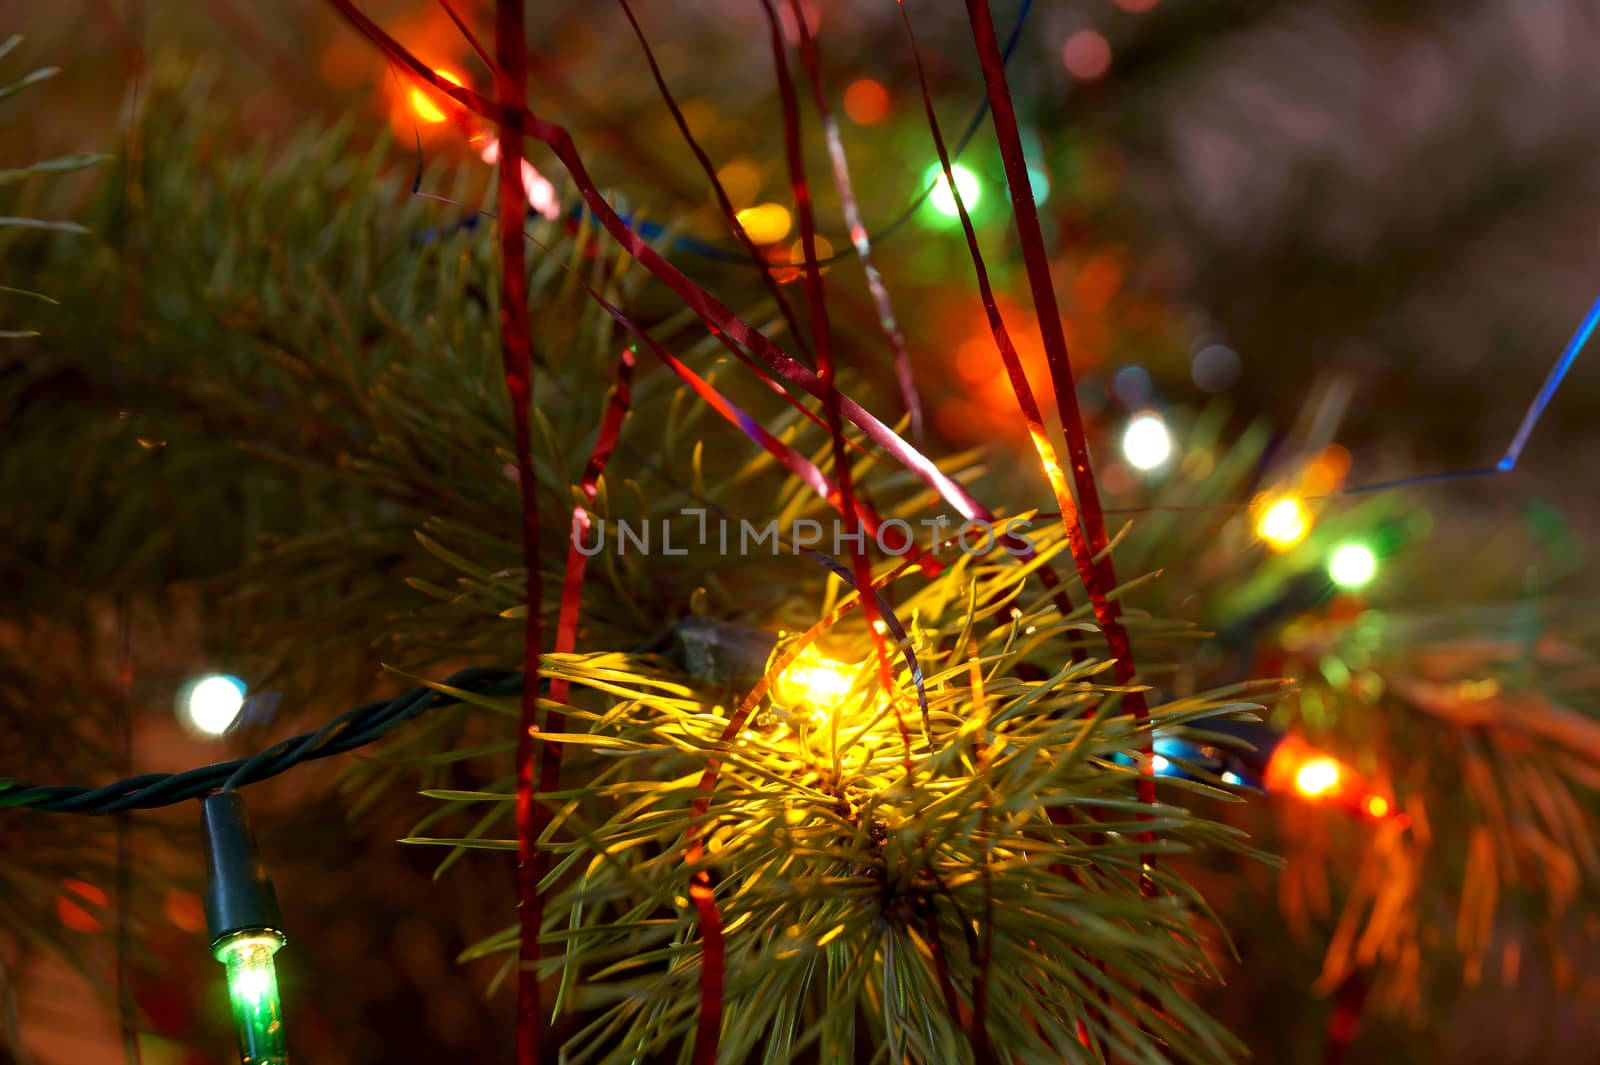 The shining fires of a fir-tree garland by Vadimdem